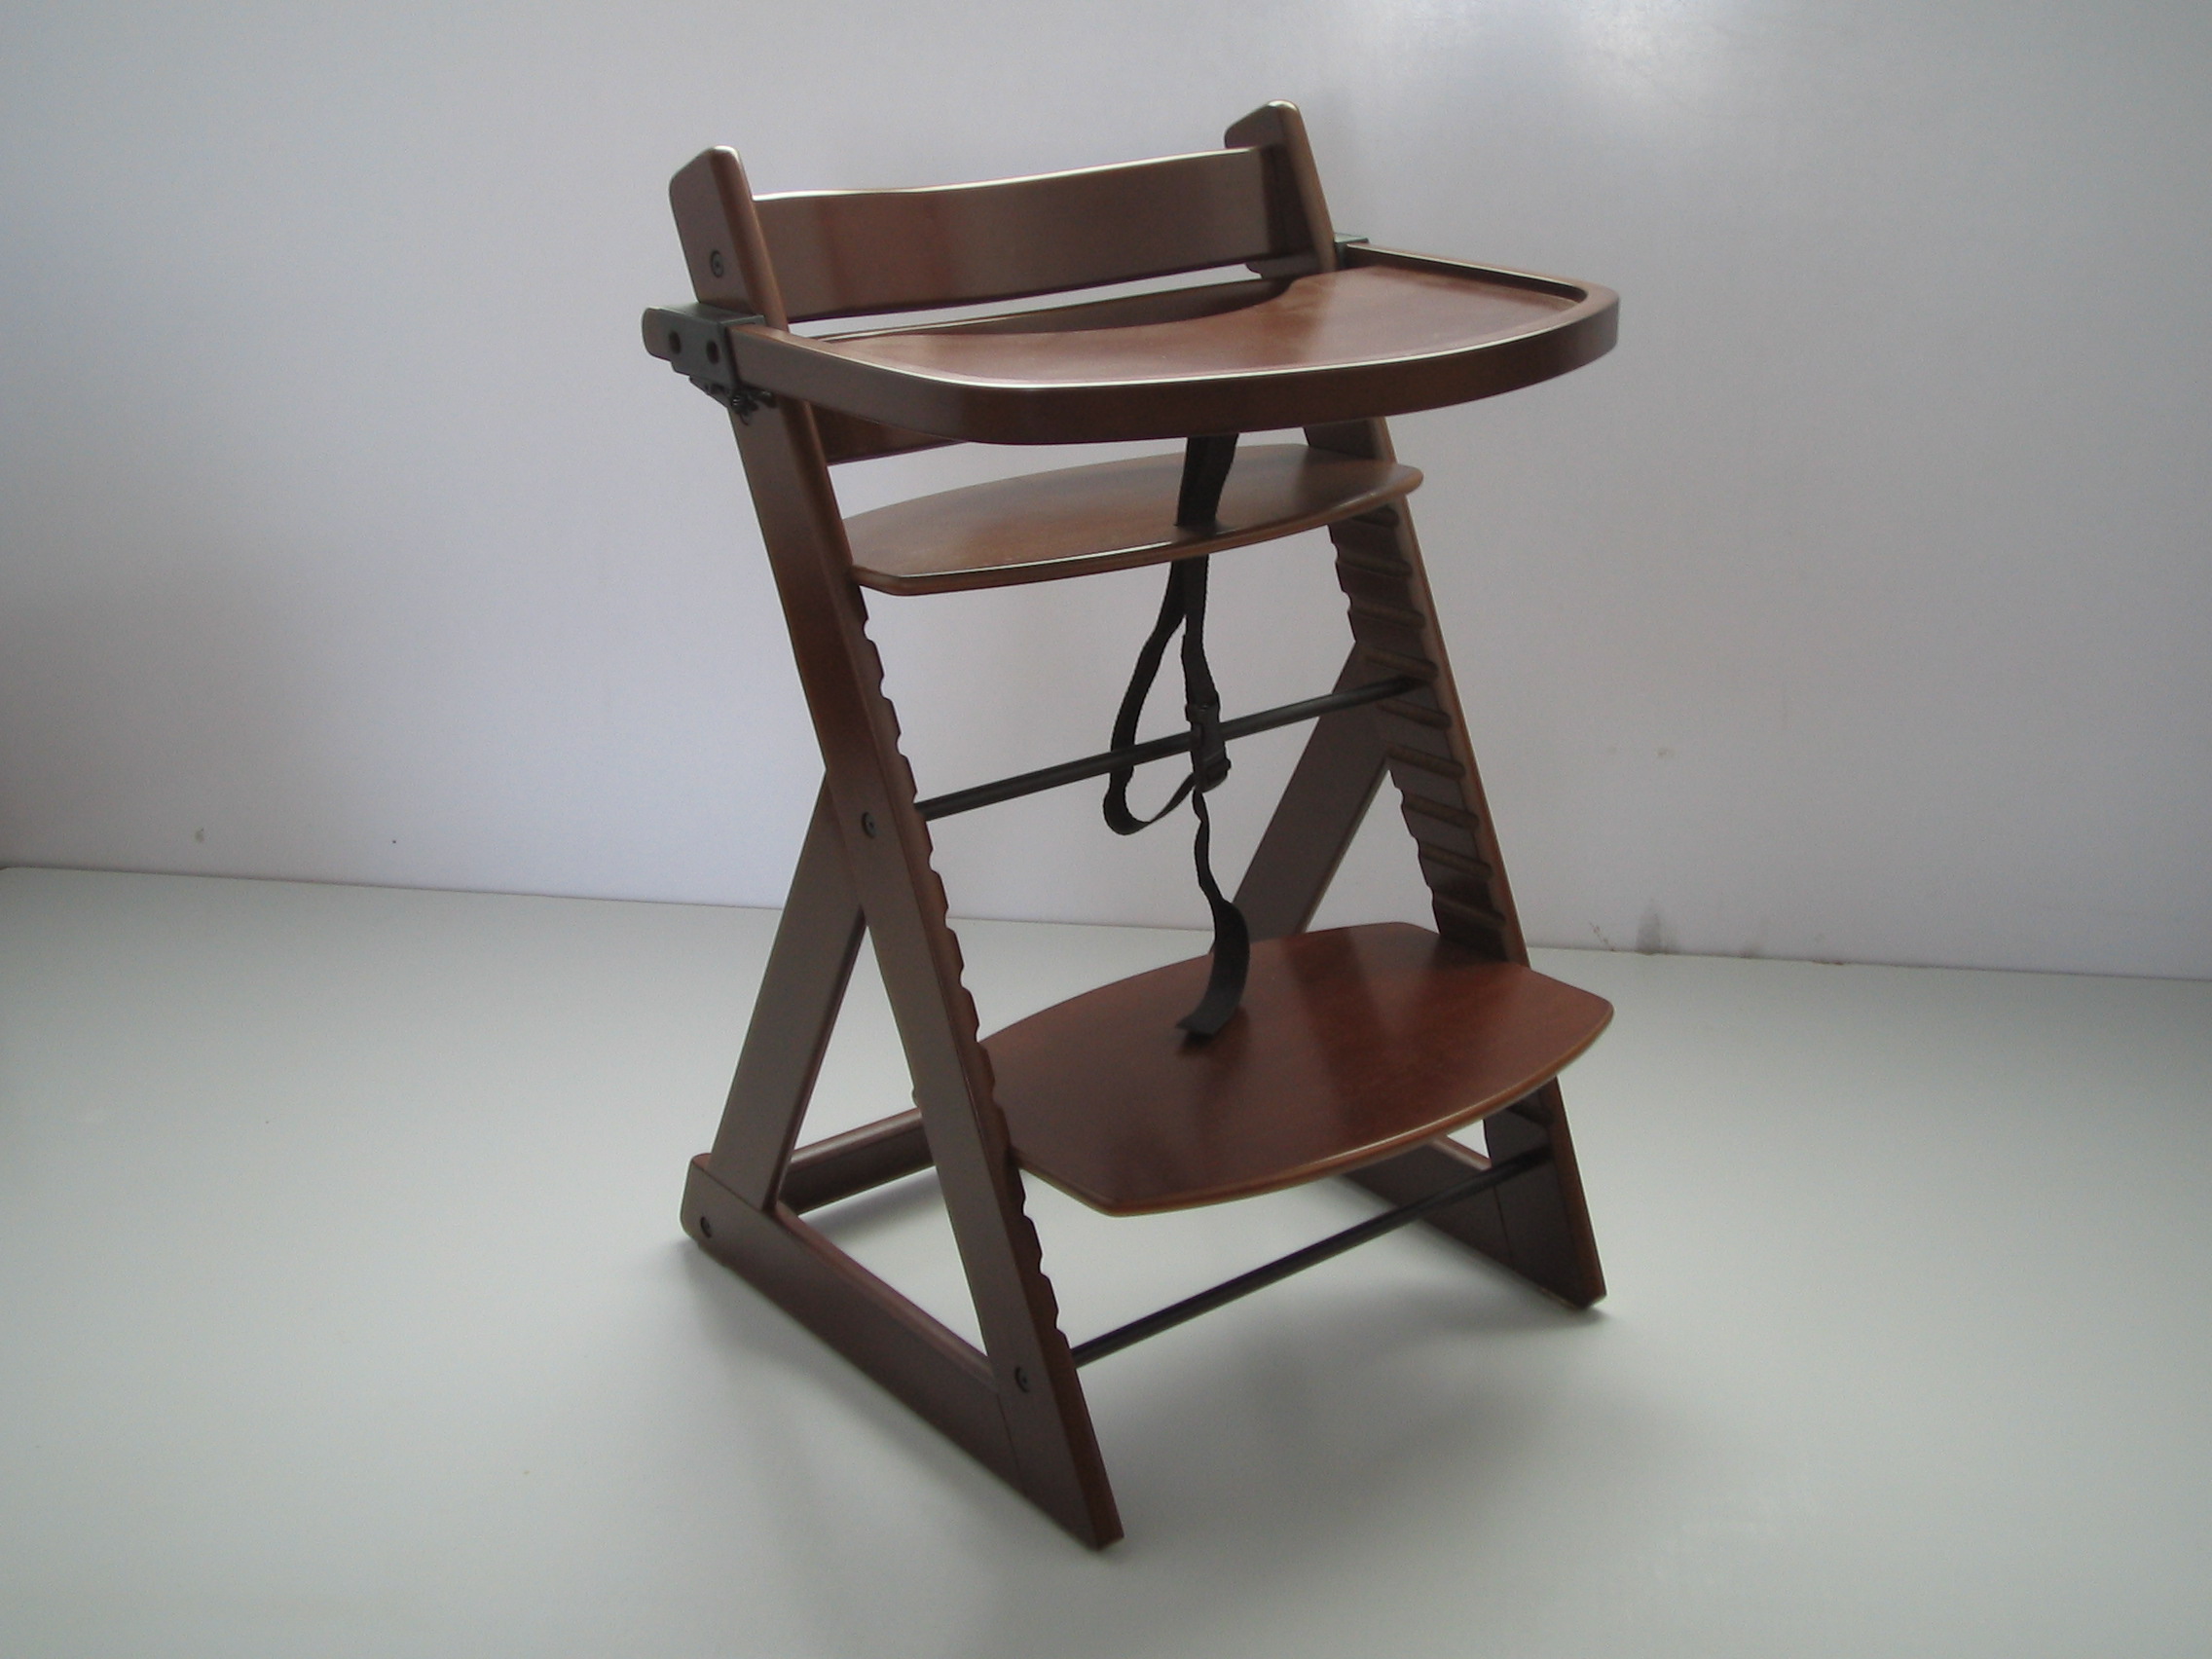 crib, high chair, bed, cabinet, bed, chair, desk, door, cradle, crib,